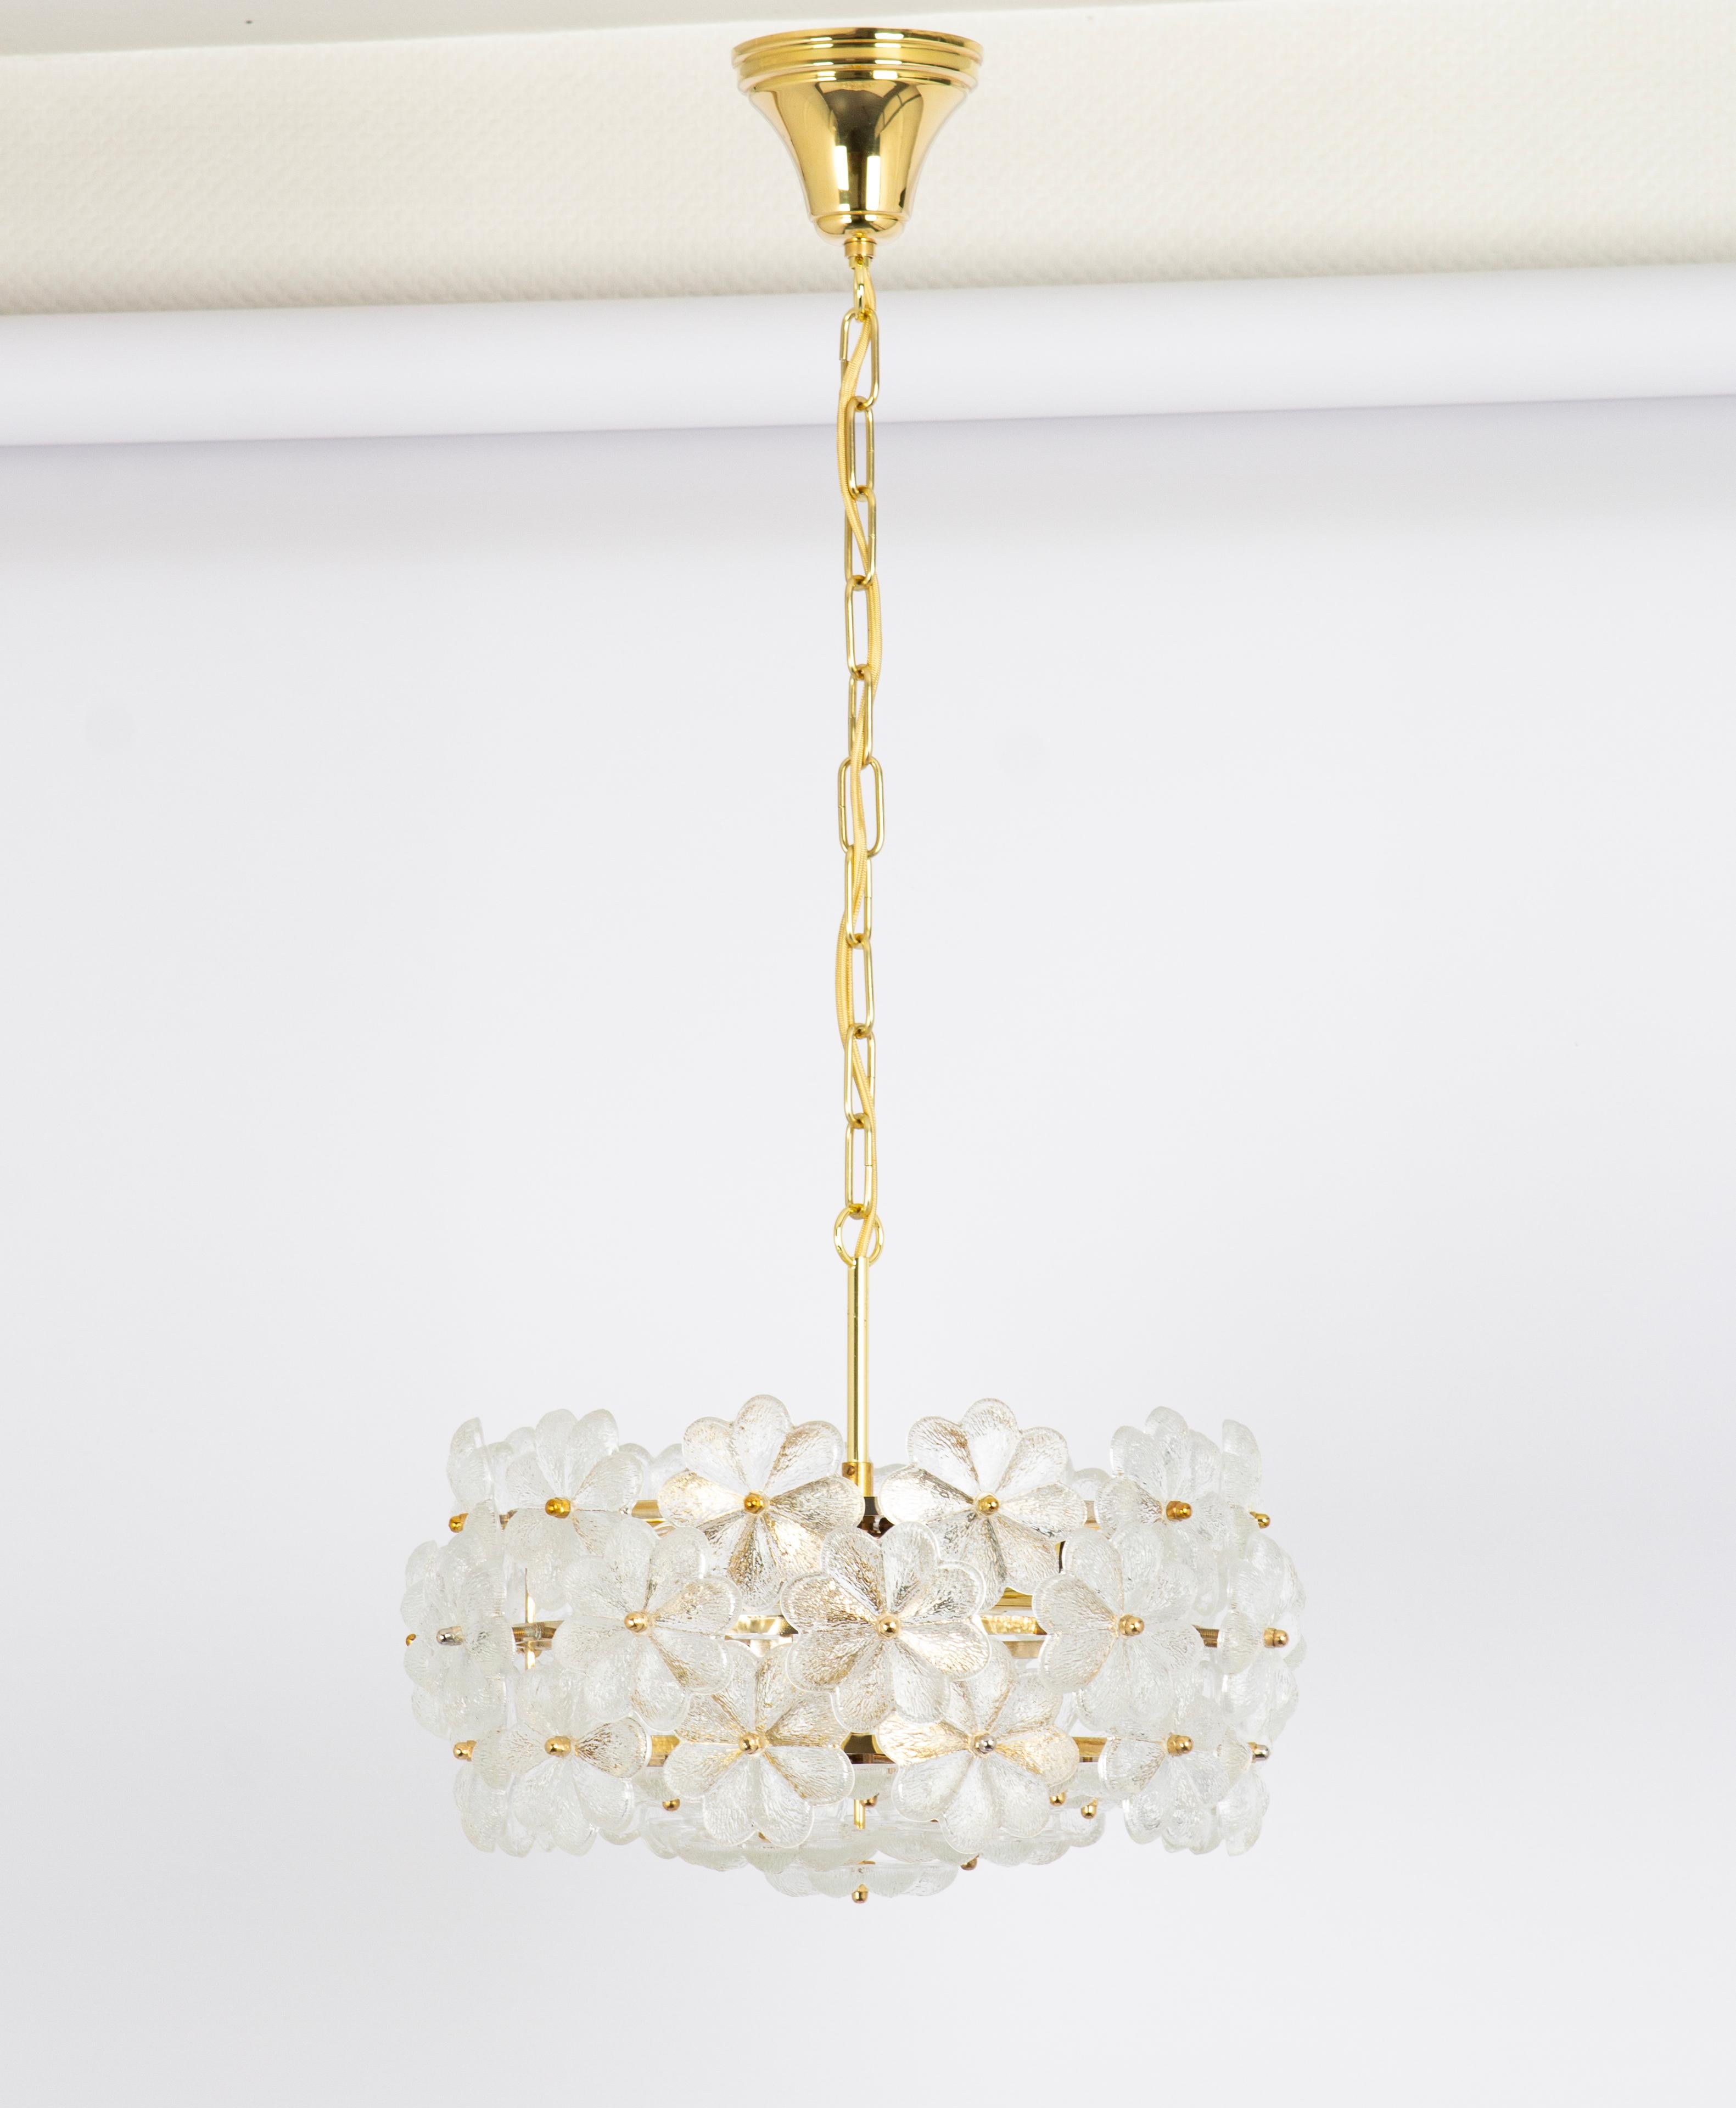 Mid-Century Modern 1 of 2 Stunning Petite Murano Glass Chandelier by Ernst Palme, Germany, 1970s For Sale